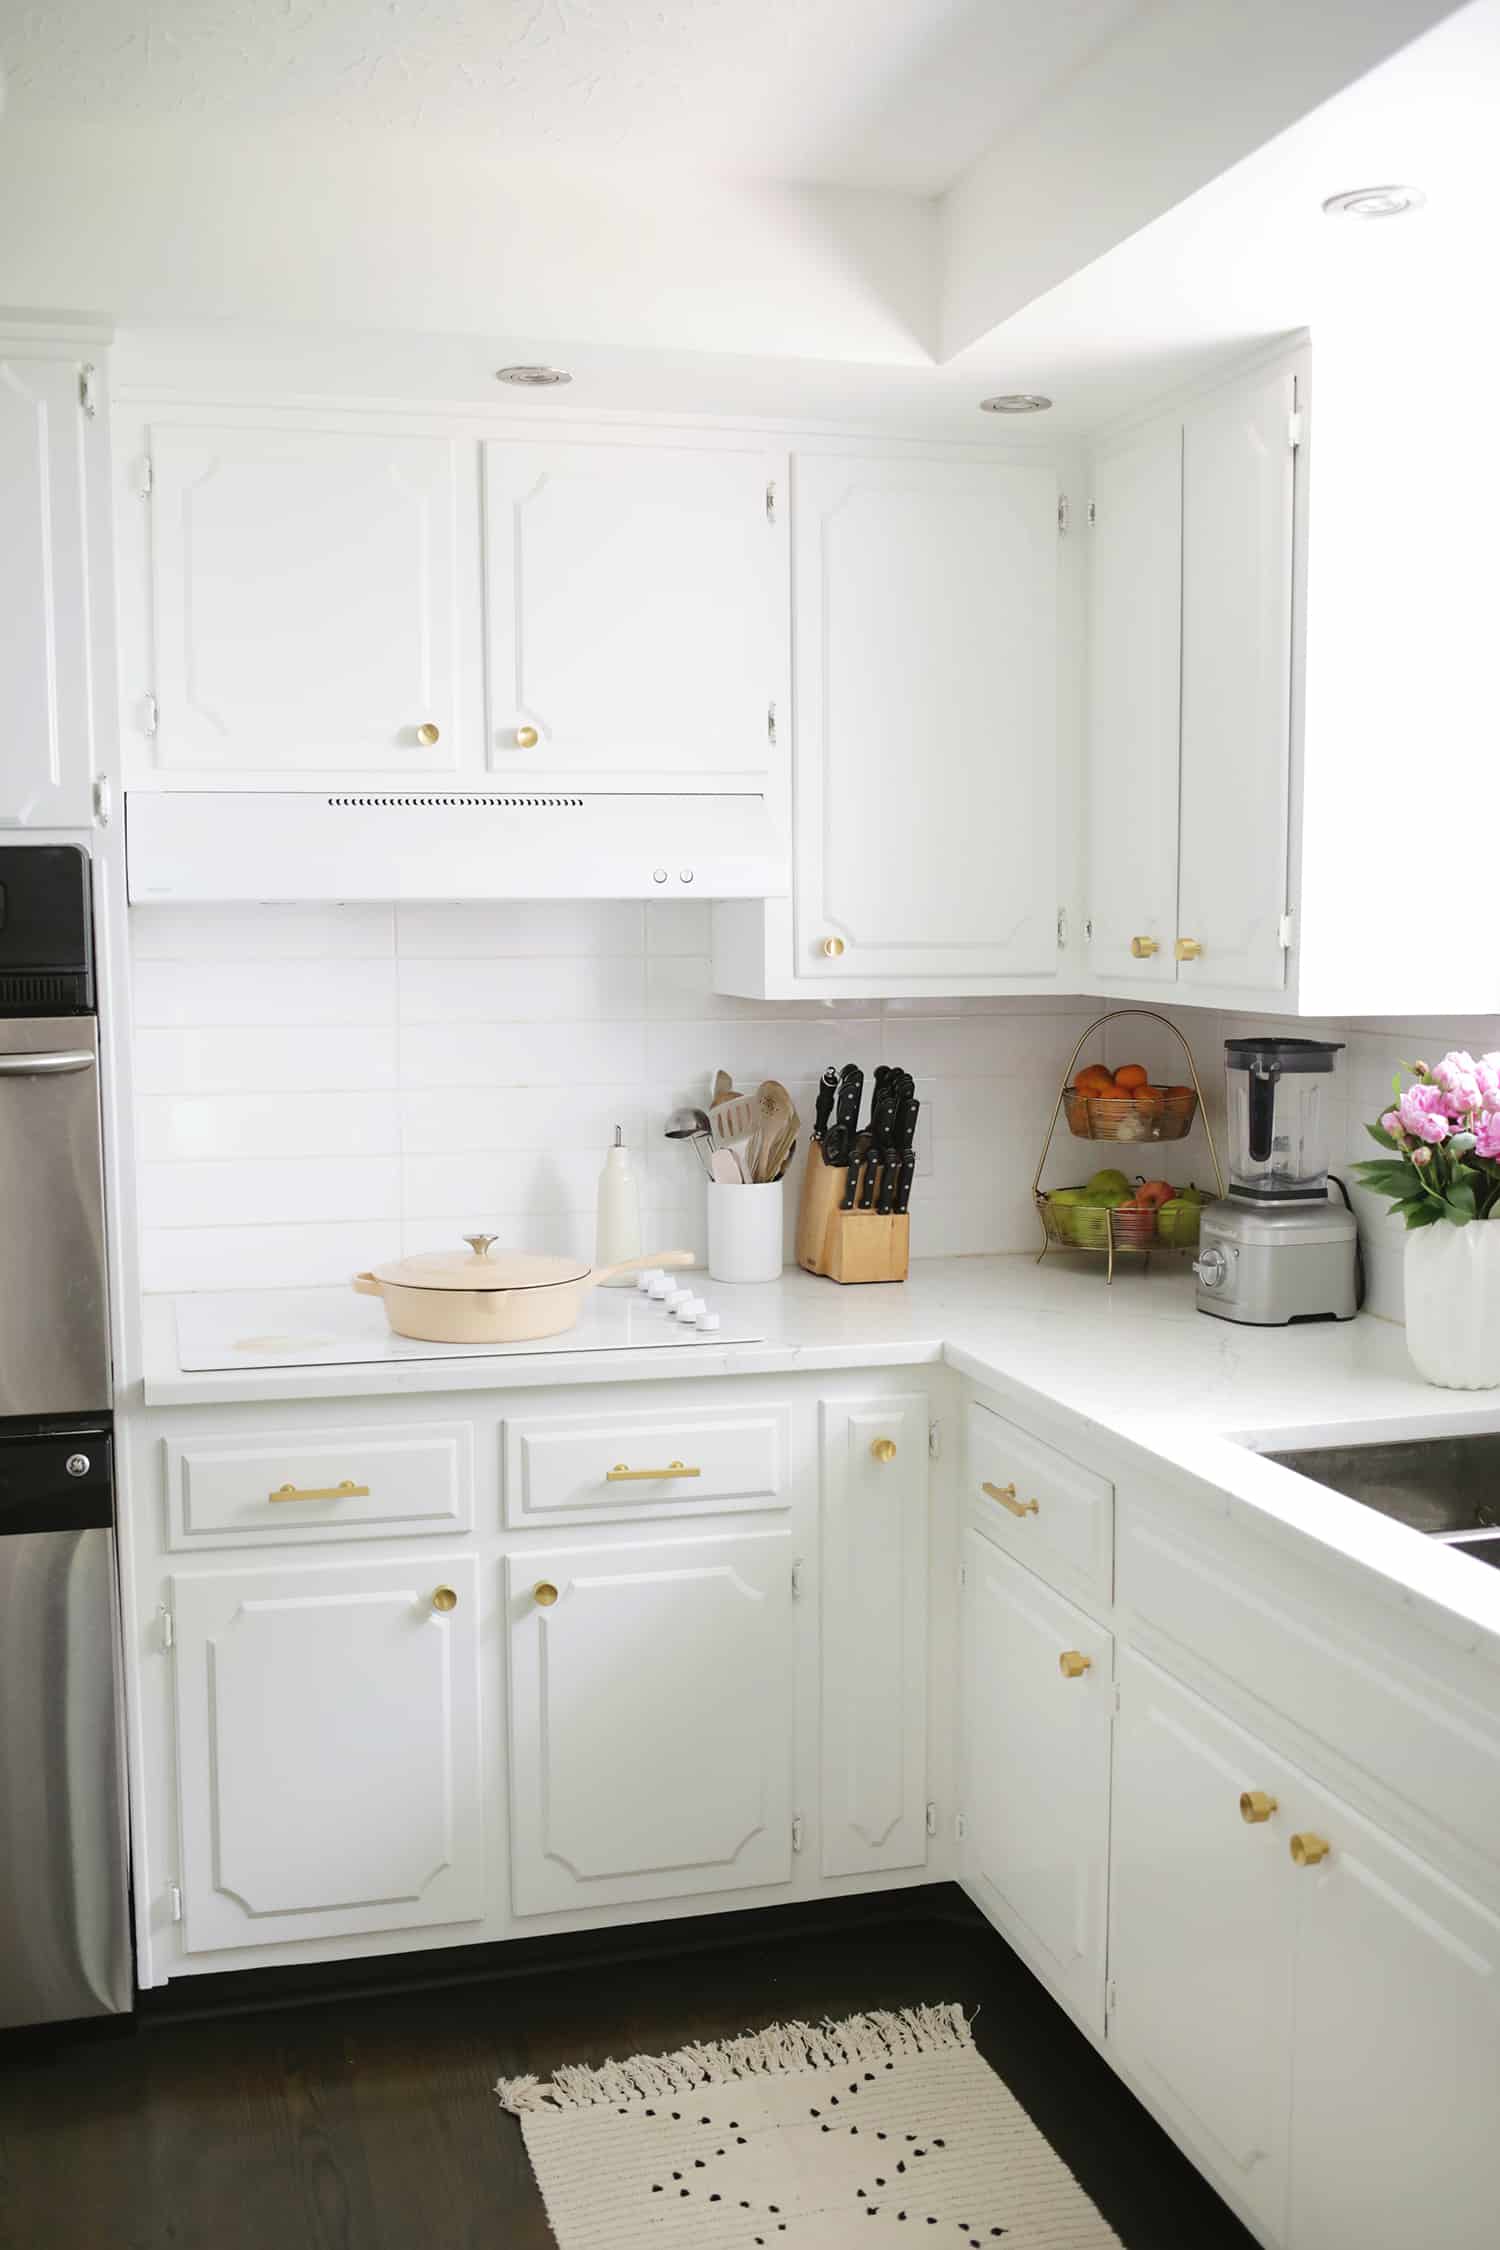 How I Refreshed My Kitchen Cabinets In, How To Make Your Kitchen Cabinets Look New Again